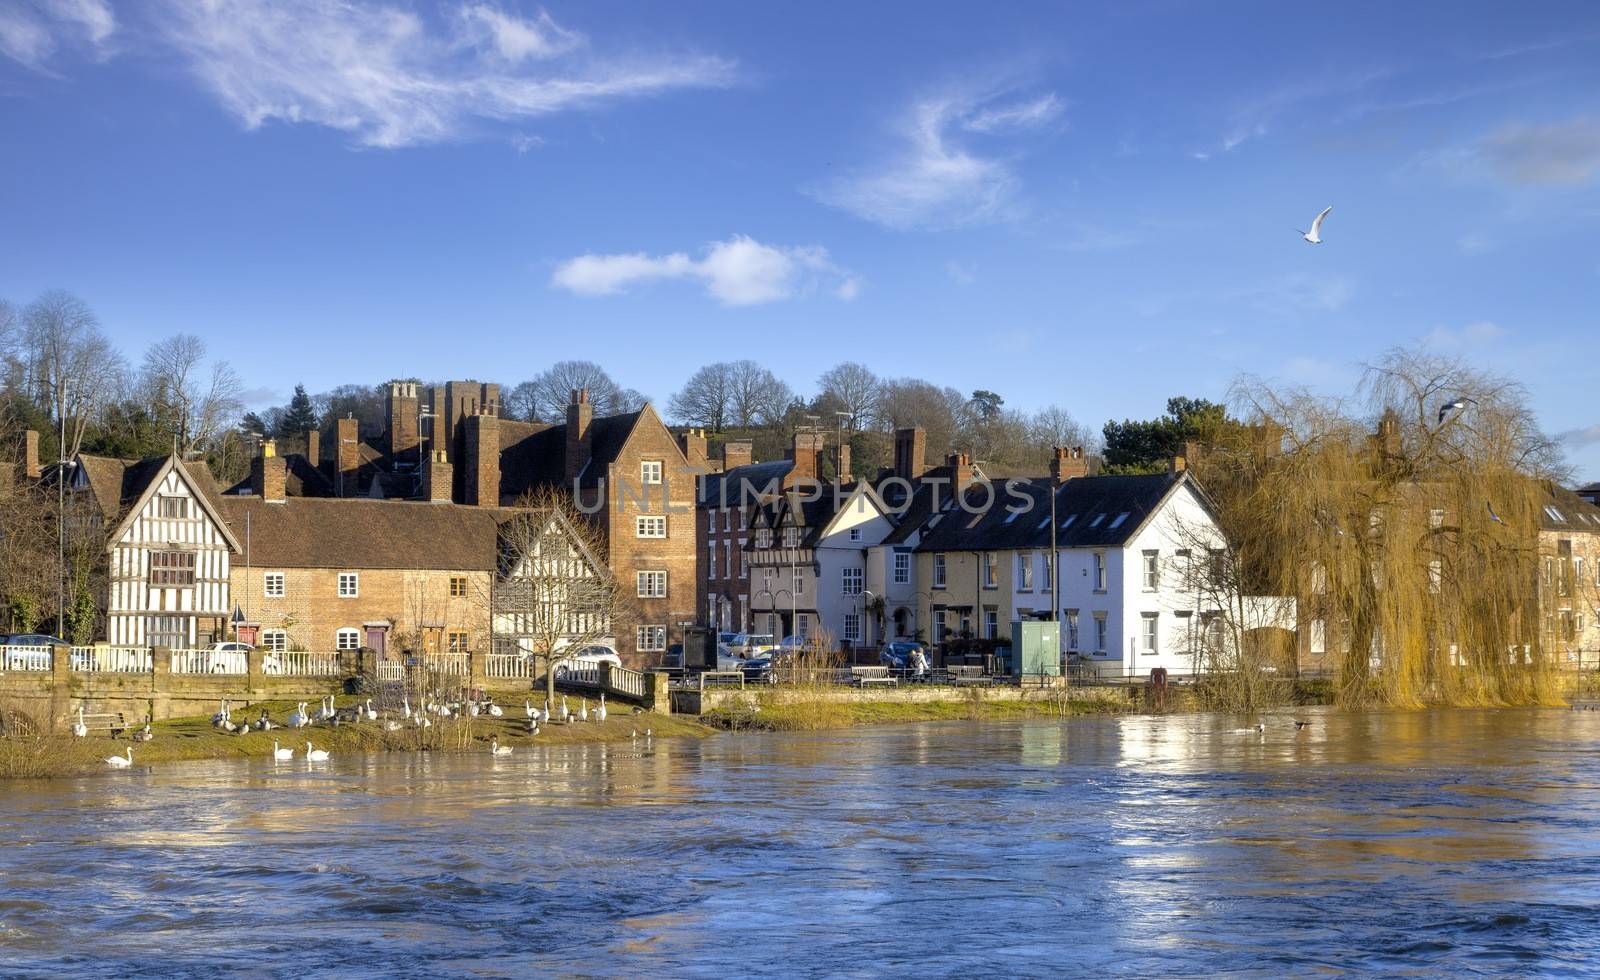 High water levels on the River Severn, Bewdley, Worcestershire, England.